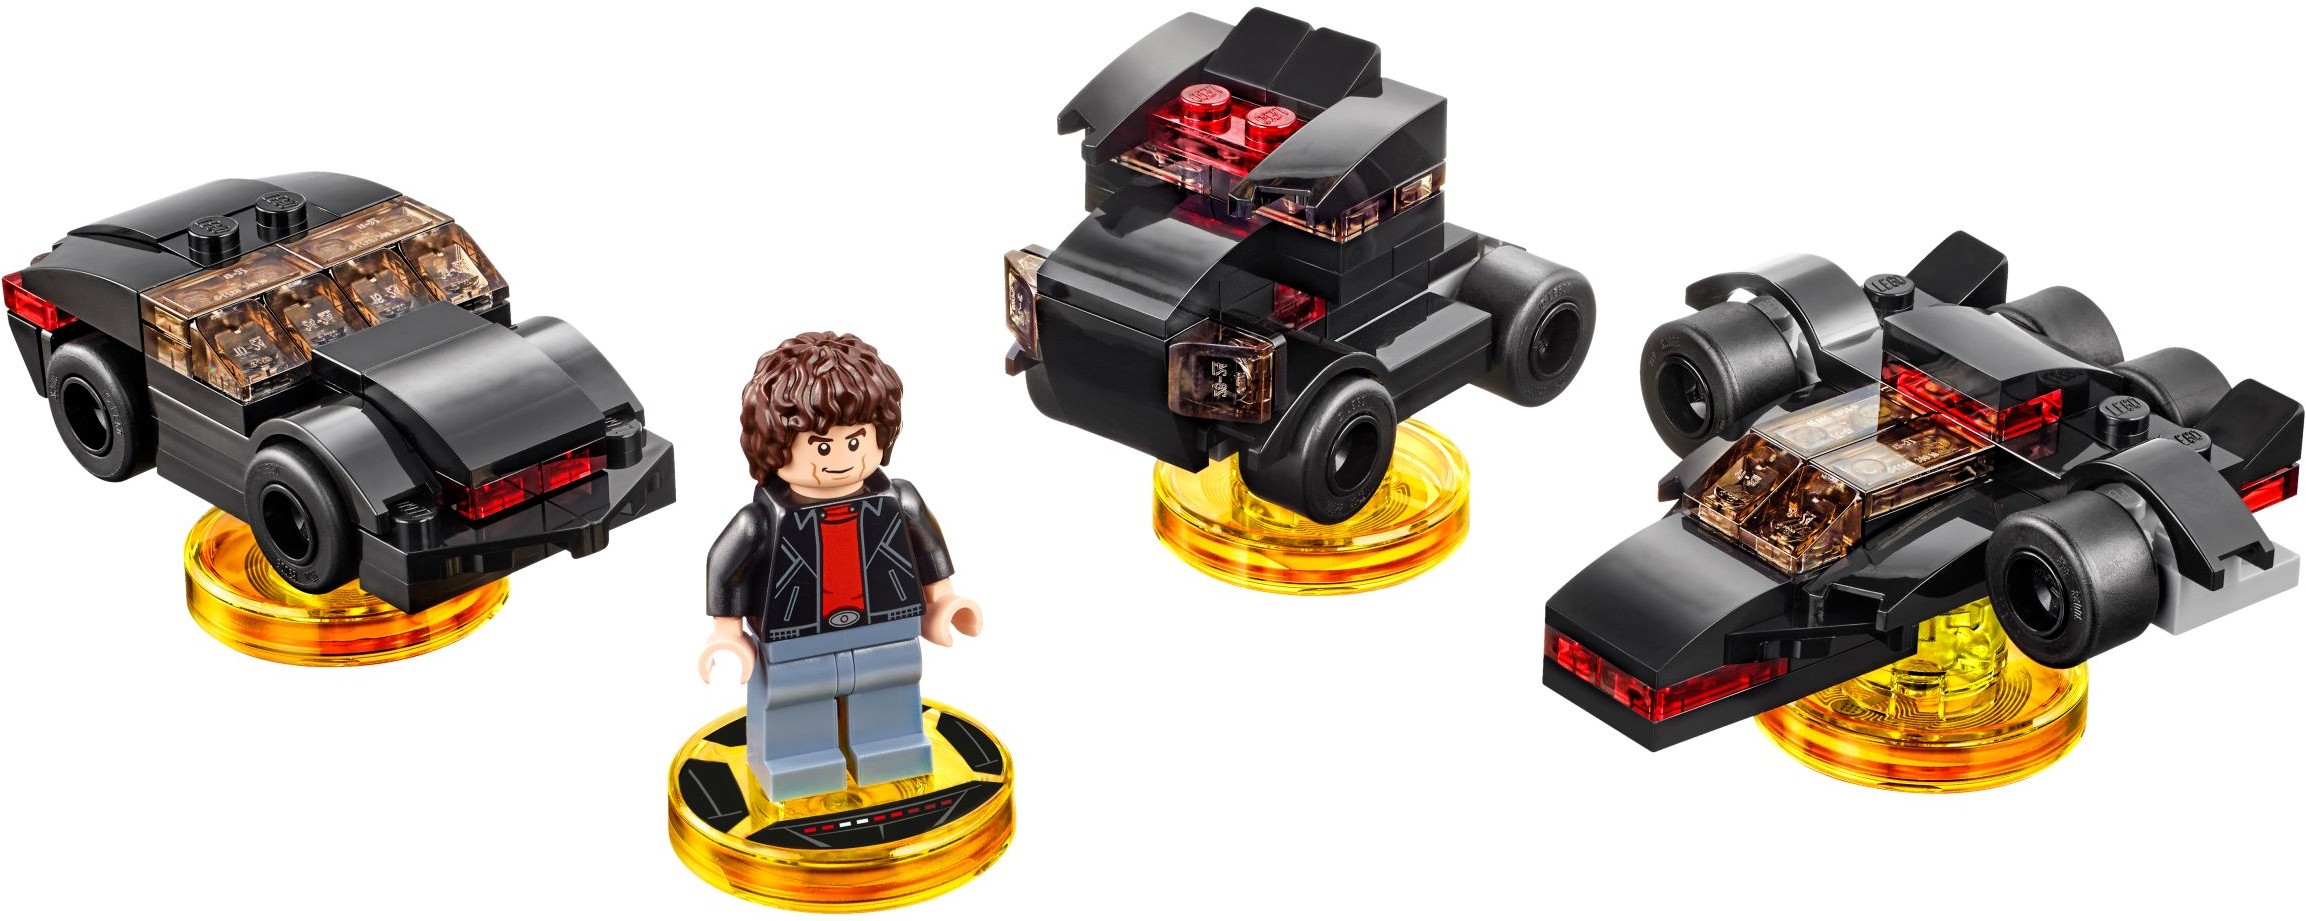 KNIGHT RIDER: KITT AND THE FLAG MOBILE COMMAND UNIT Achieves 10K Support on LEGO IDEAS